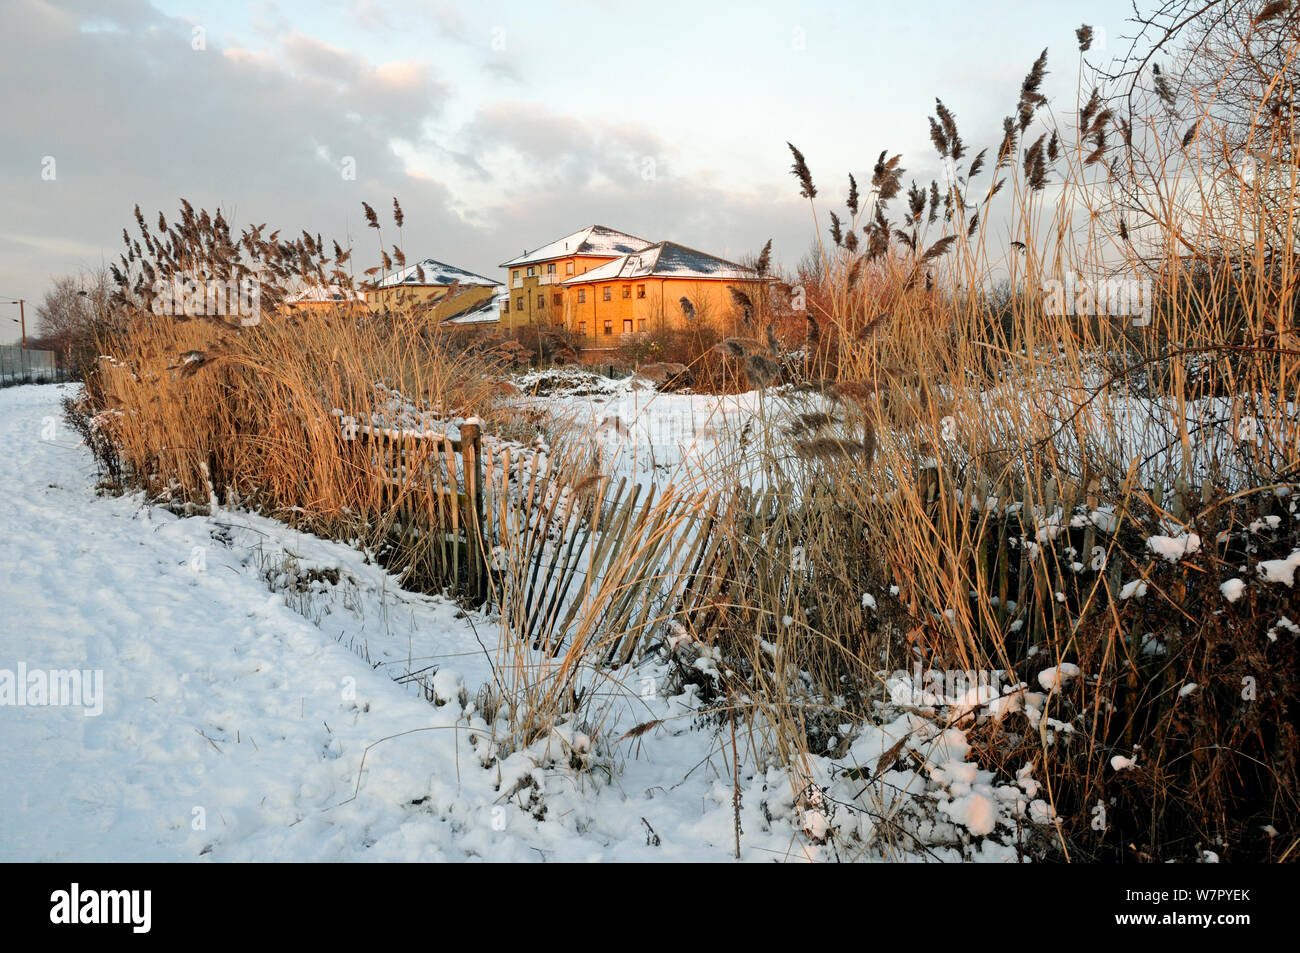 Gillespie Park Local Nature Reserve an urban ecology park under snow with Common reed (Phragmites communis) in foreground and social or council houses behind, Highbury Islington London England UK Stock Photo